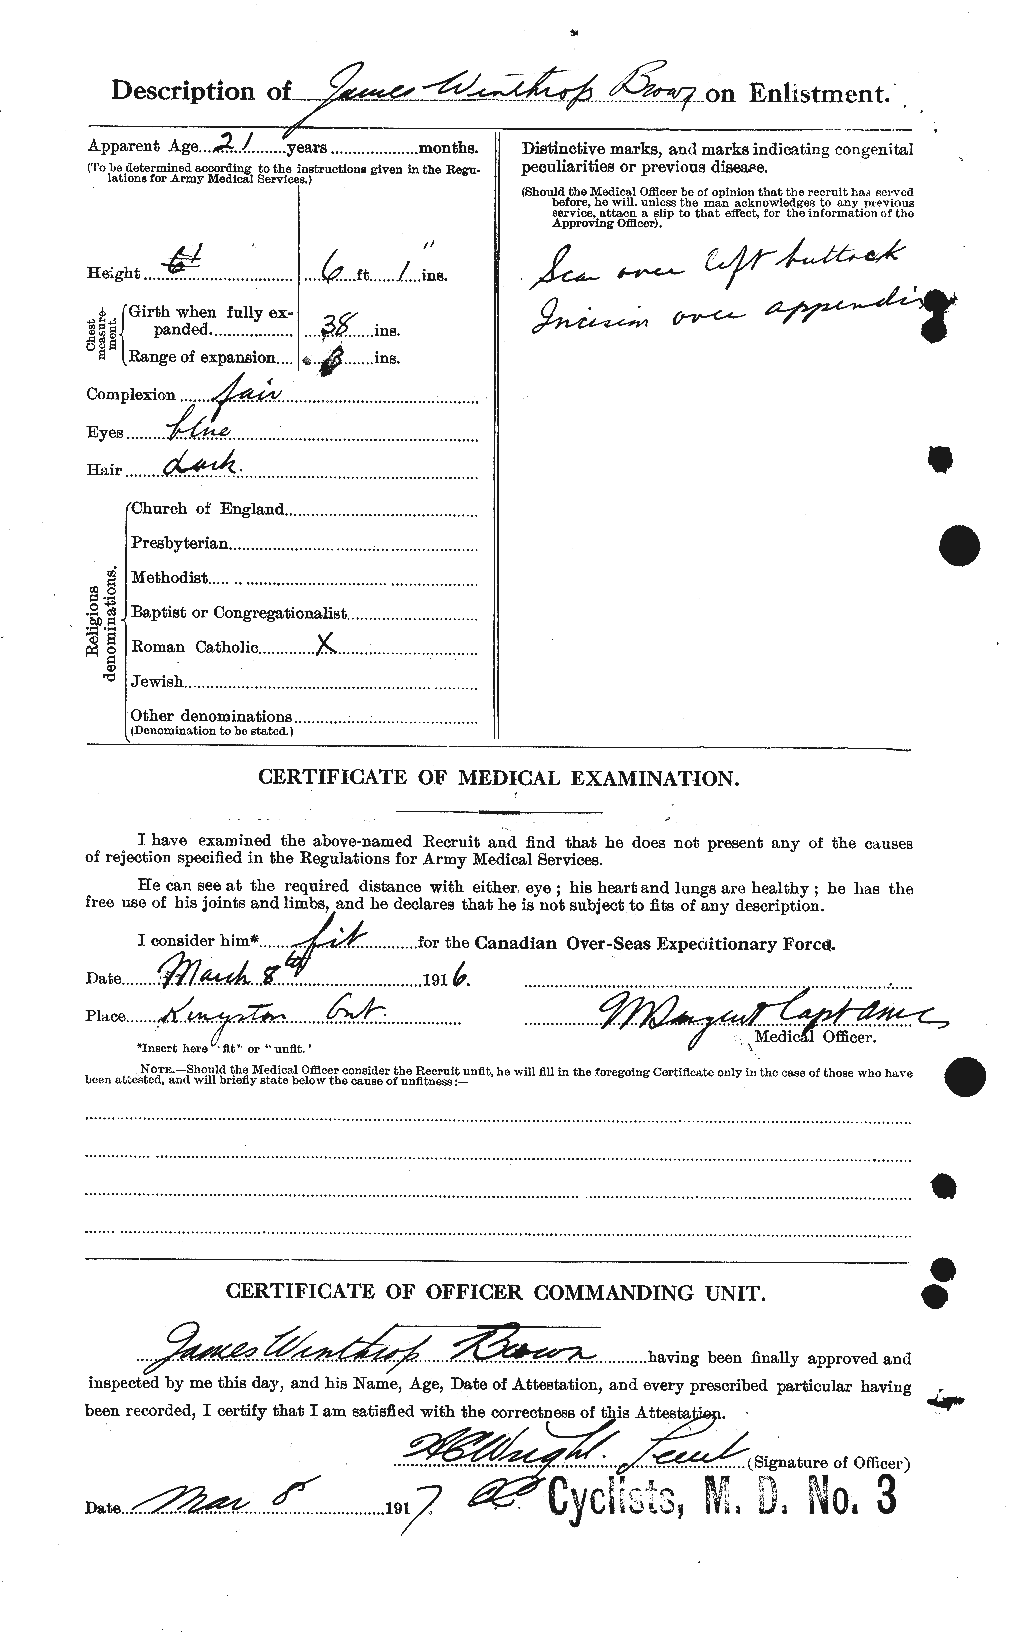 Personnel Records of the First World War - CEF 269608b